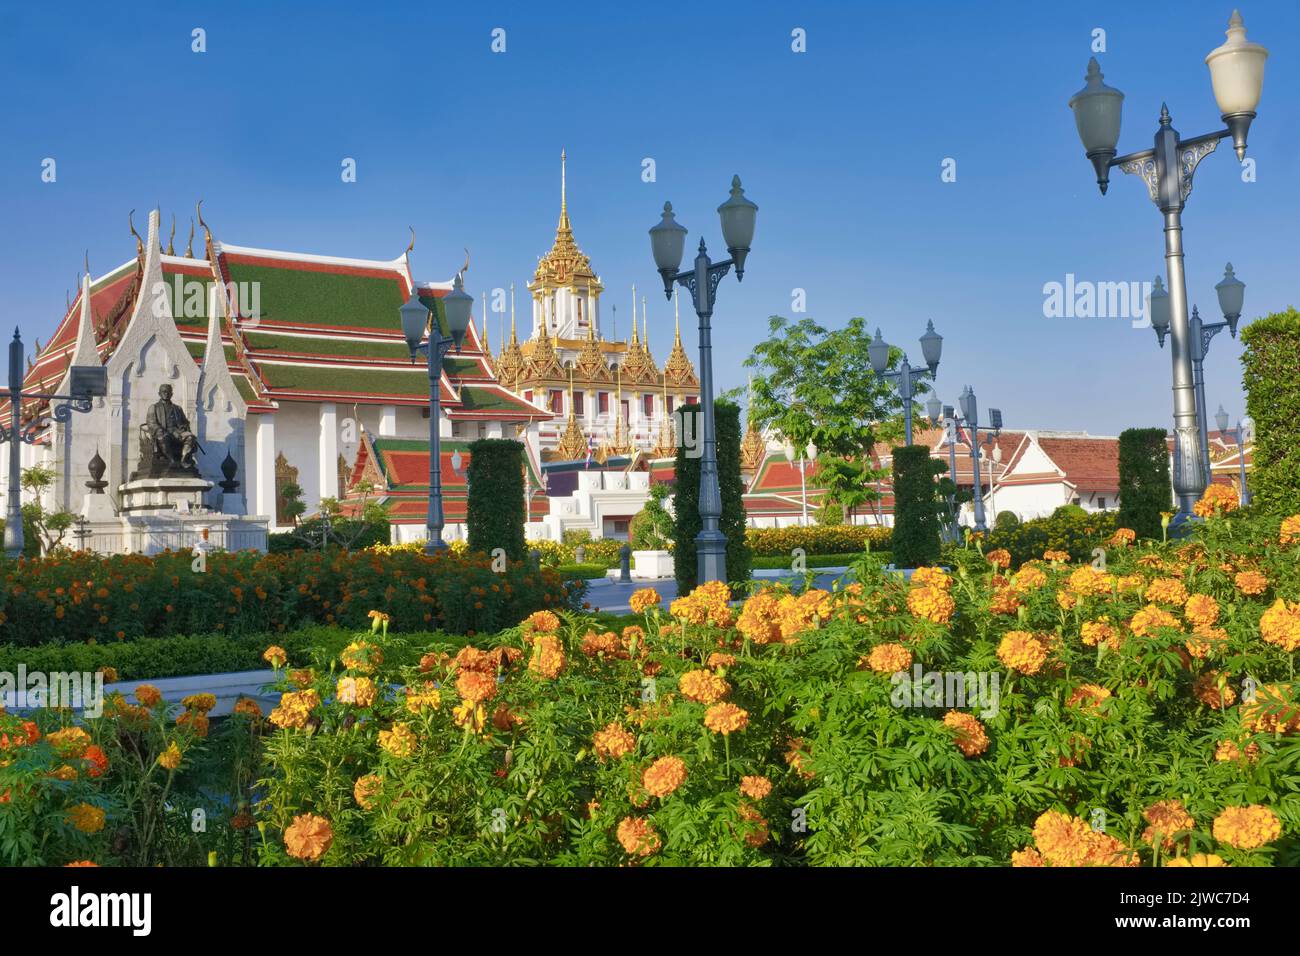 The iconic Lohaprasad building (m), part of (temple) Wat Ratchanadta, with marigold flowers from an adjacent park in the foreground; Bangkok, Thailand Stock Photo